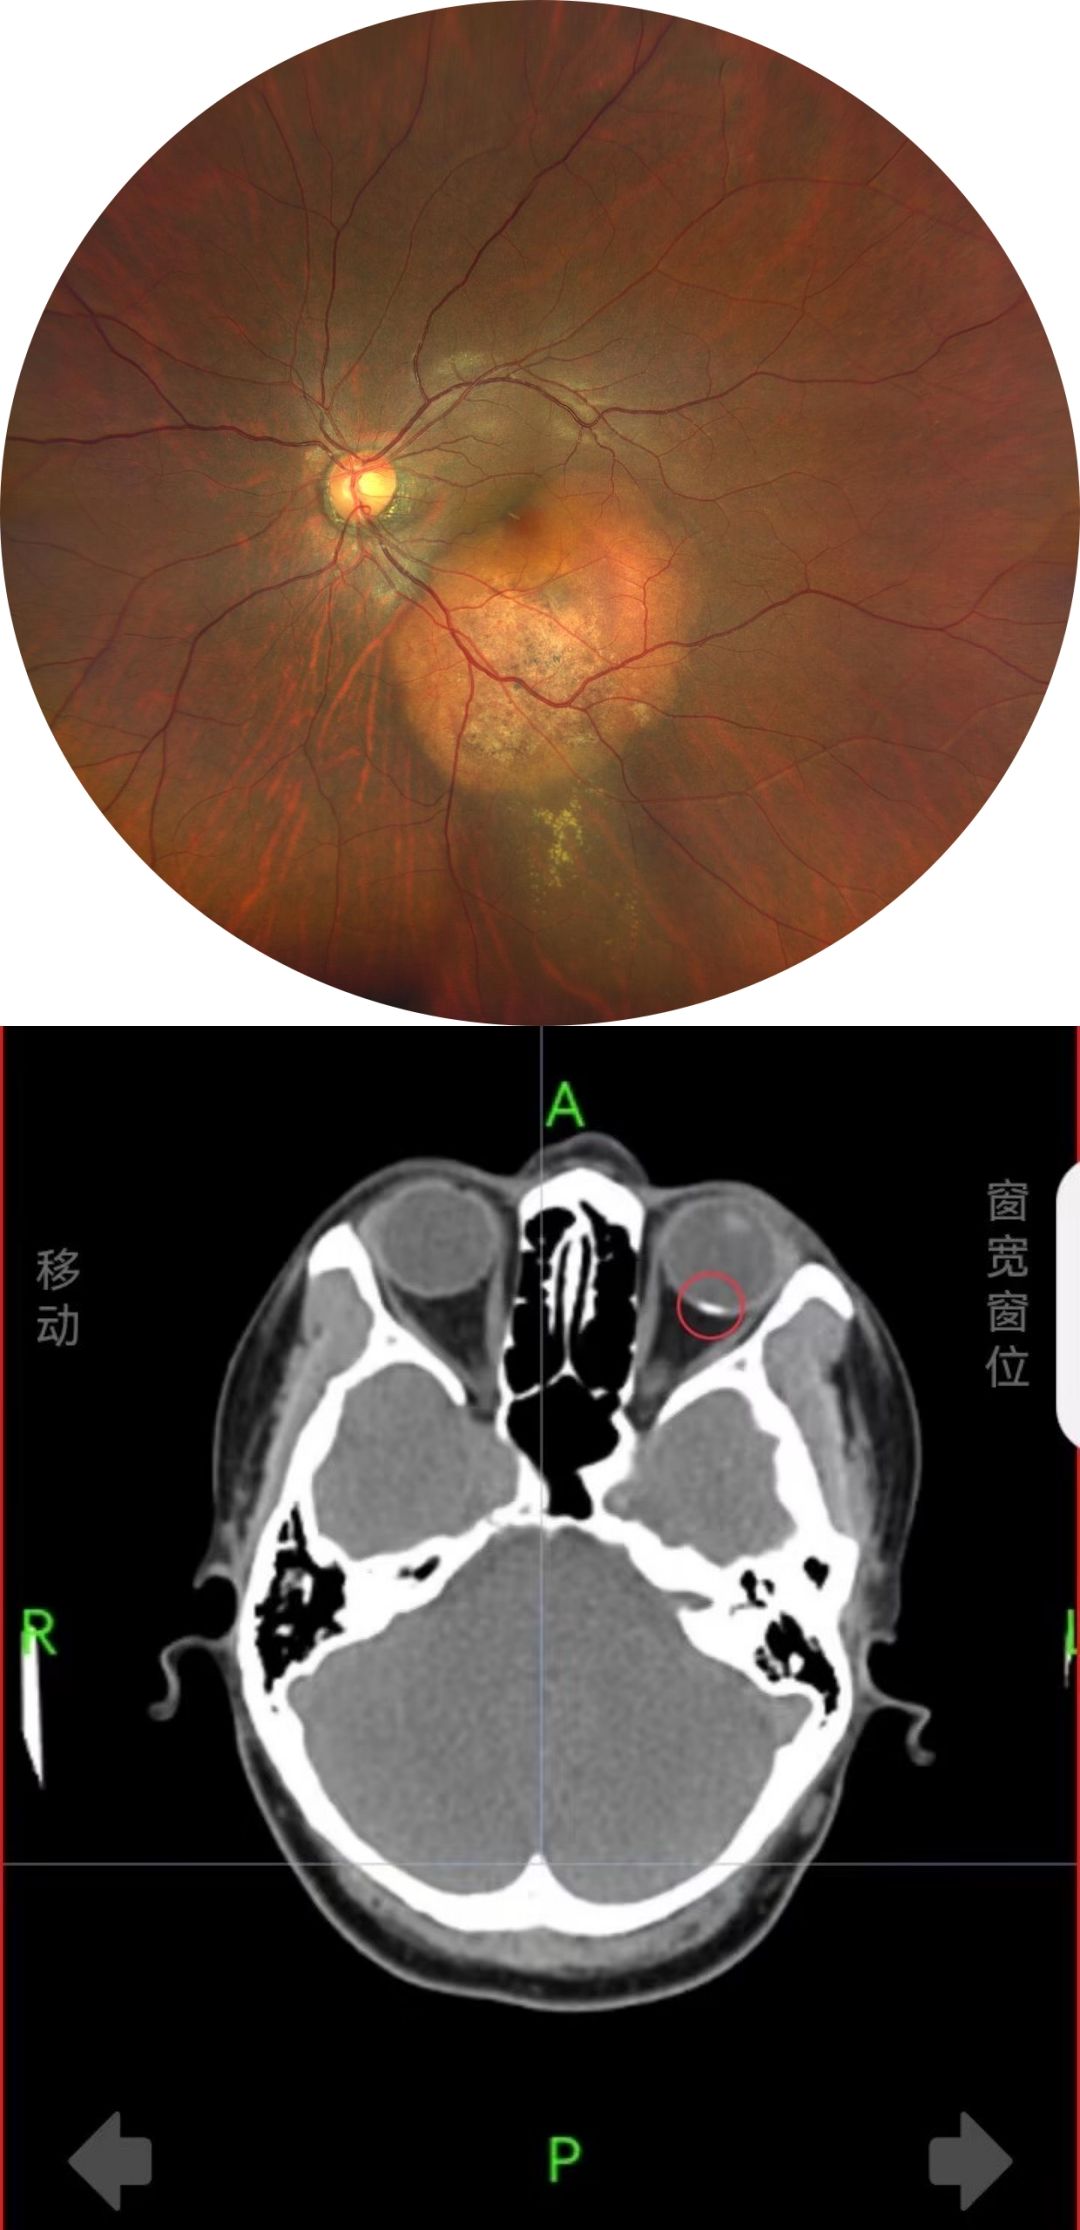 Choroidal Osteoma with Secondary CNV Captured with Full-range SS-OCTA